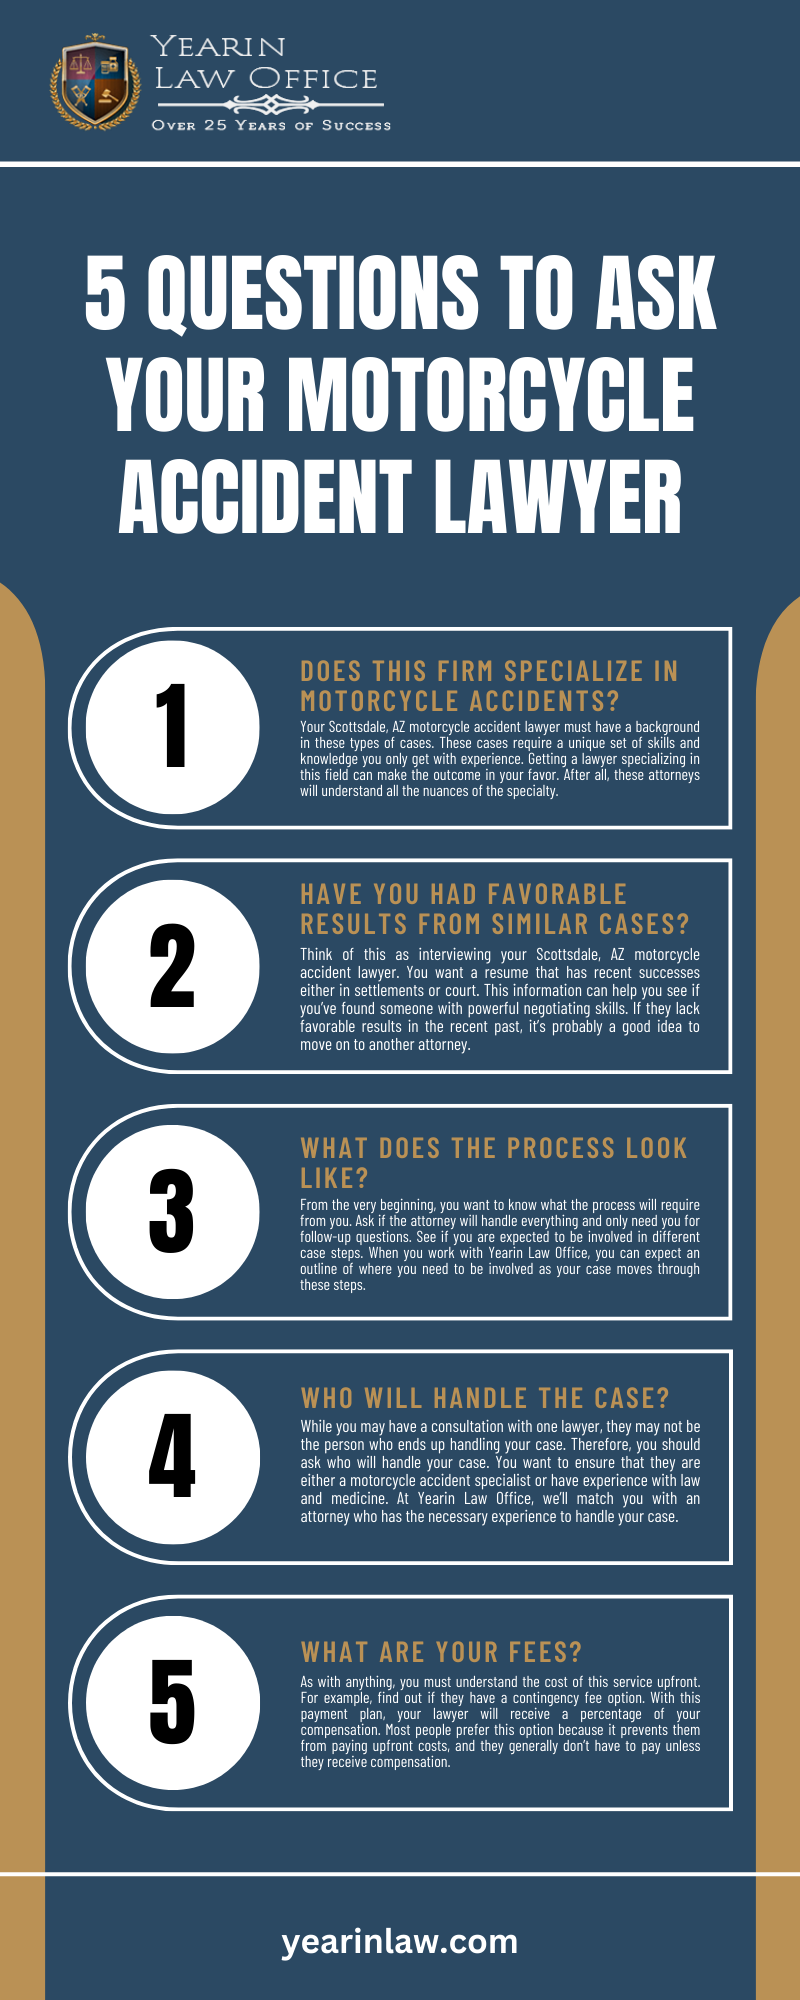 5 QUestions To Ask Your Motorcycle Accident Lawyer Infographic